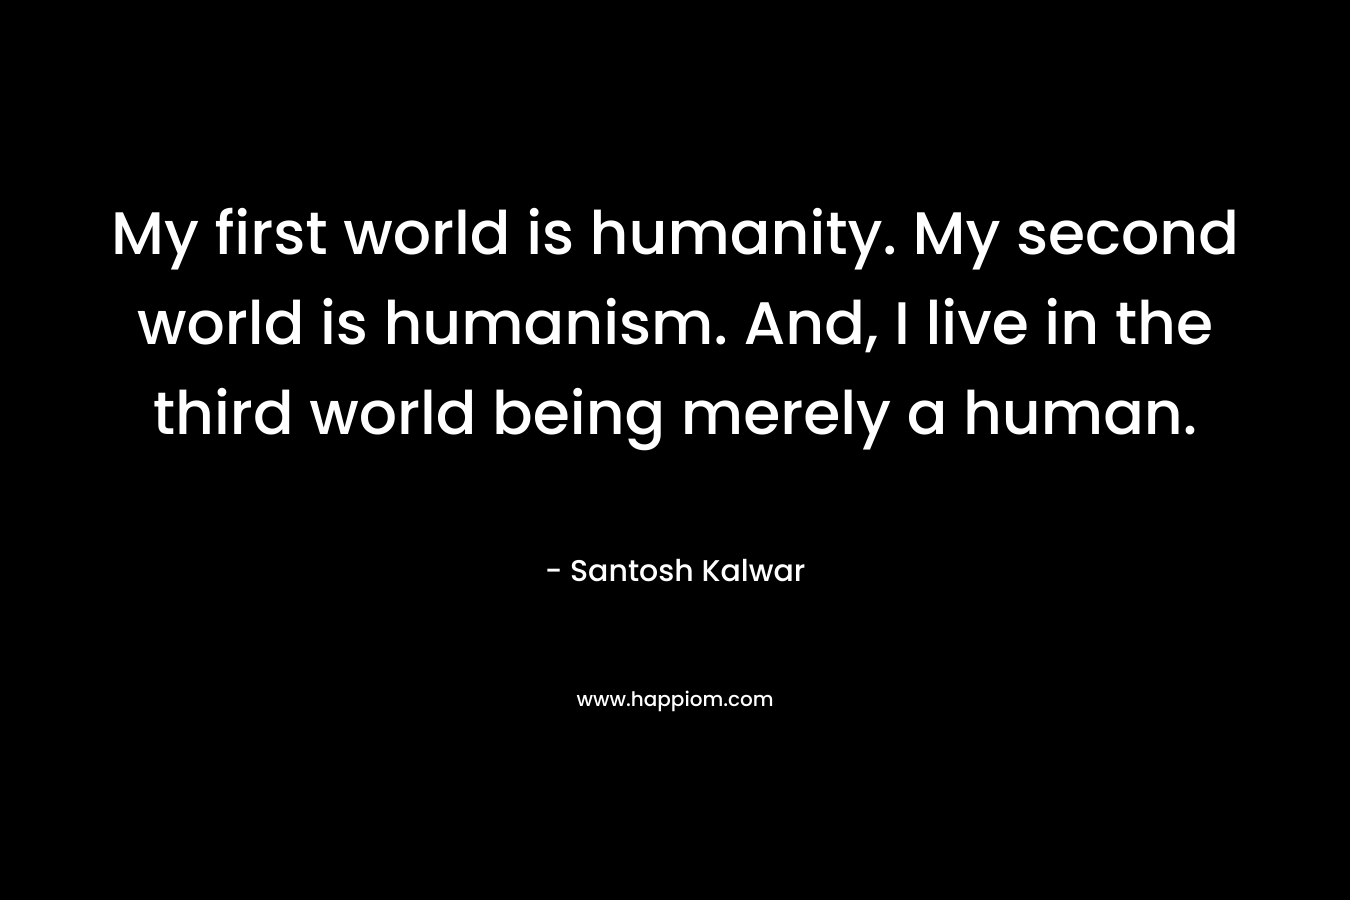 My first world is humanity. My second world is humanism. And, I live in the third world being merely a human. – Santosh Kalwar